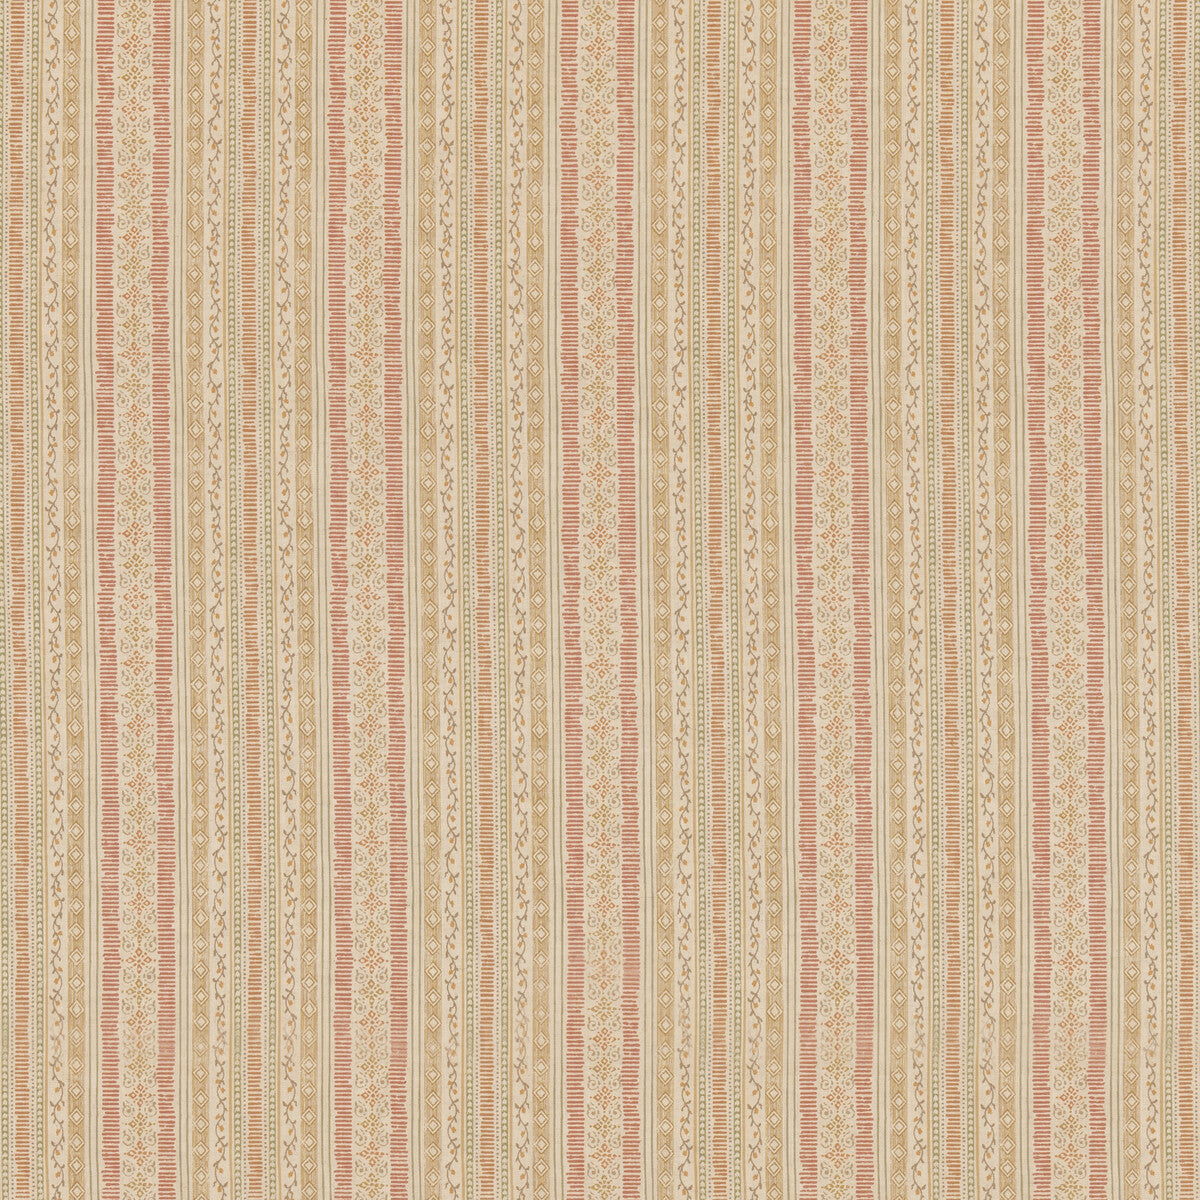 Compton fabric in red/ochre color - pattern BP11005.3.0 - by G P &amp; J Baker in the House Small Prints collection